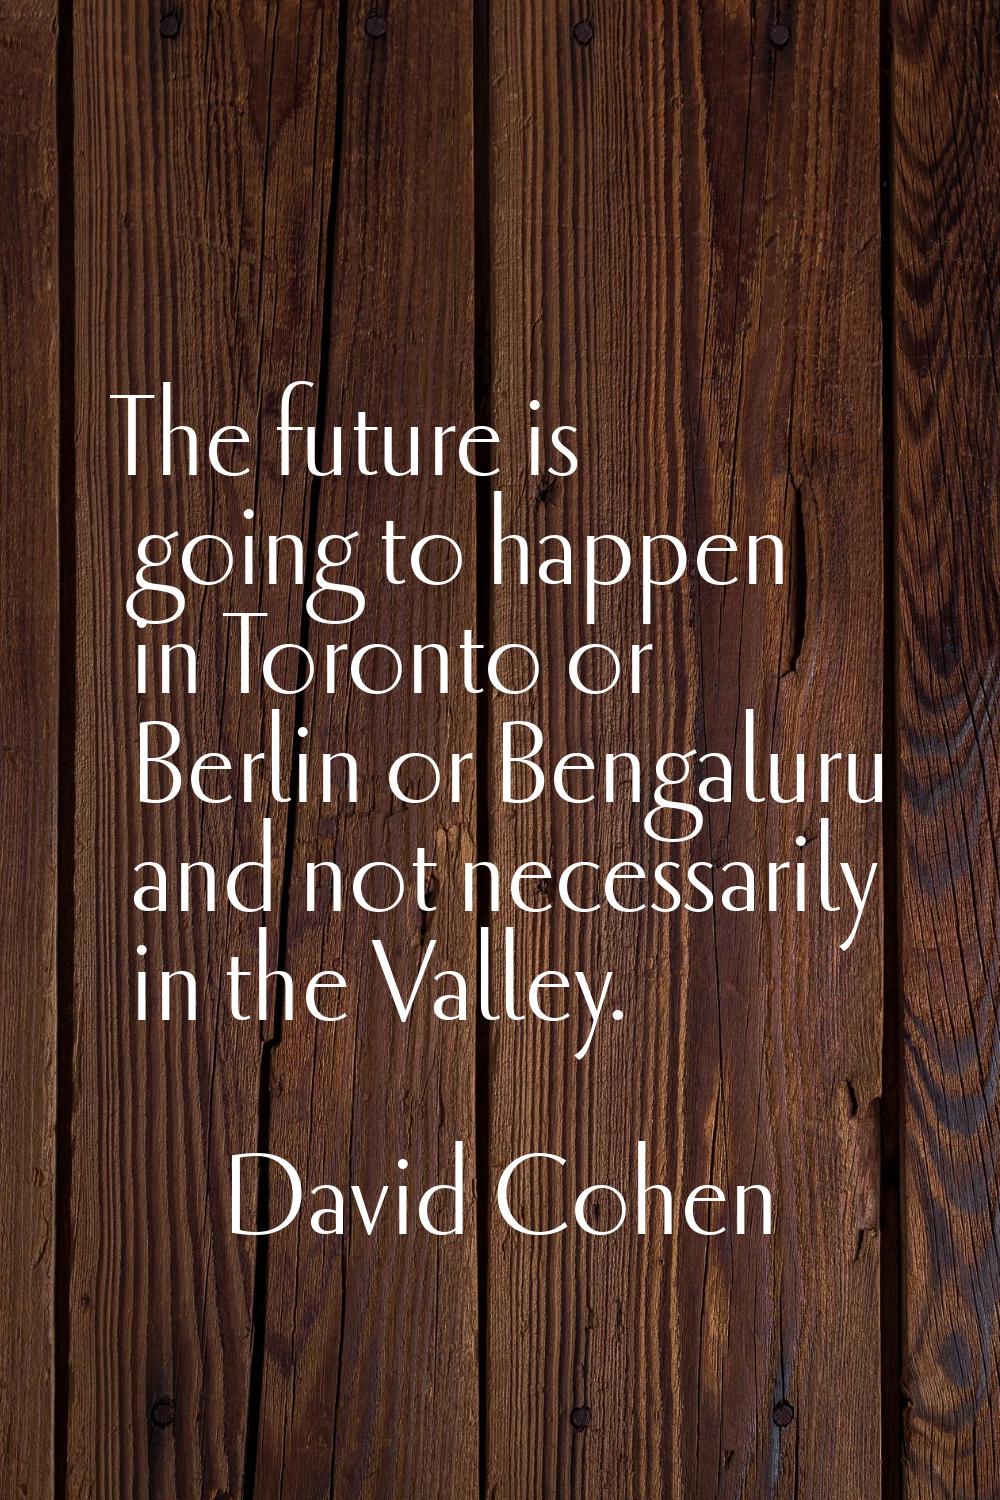 The future is going to happen in Toronto or Berlin or Bengaluru and not necessarily in the Valley.